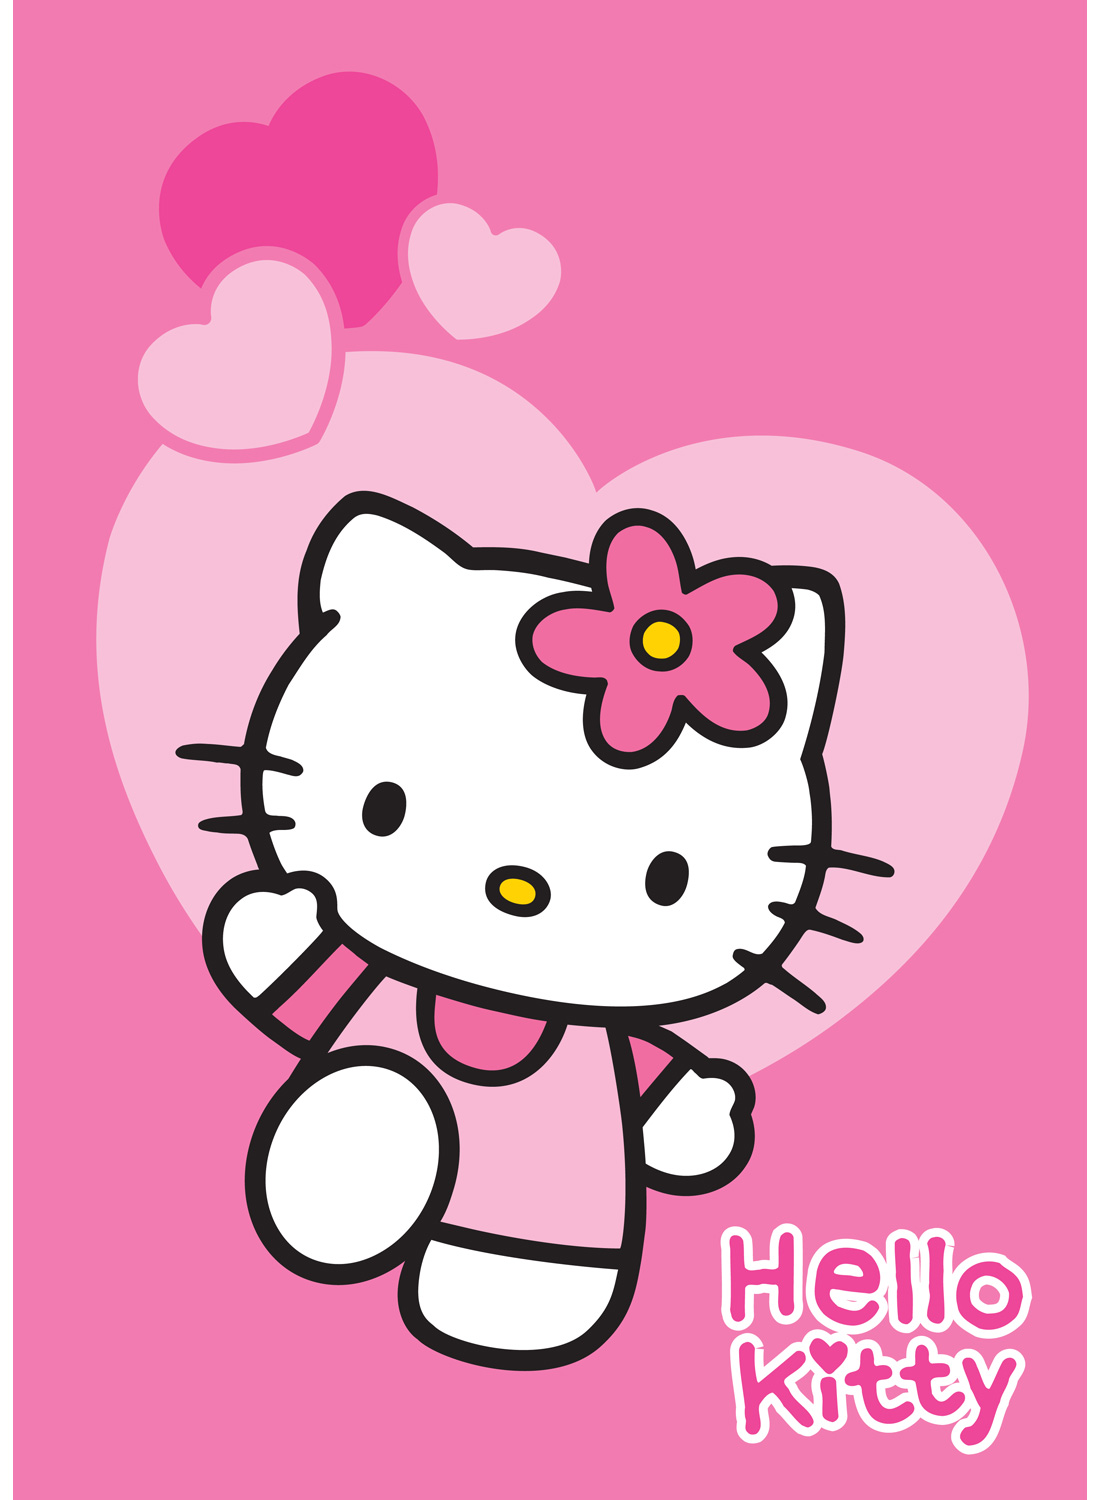 Hello kitty â cakes for africa